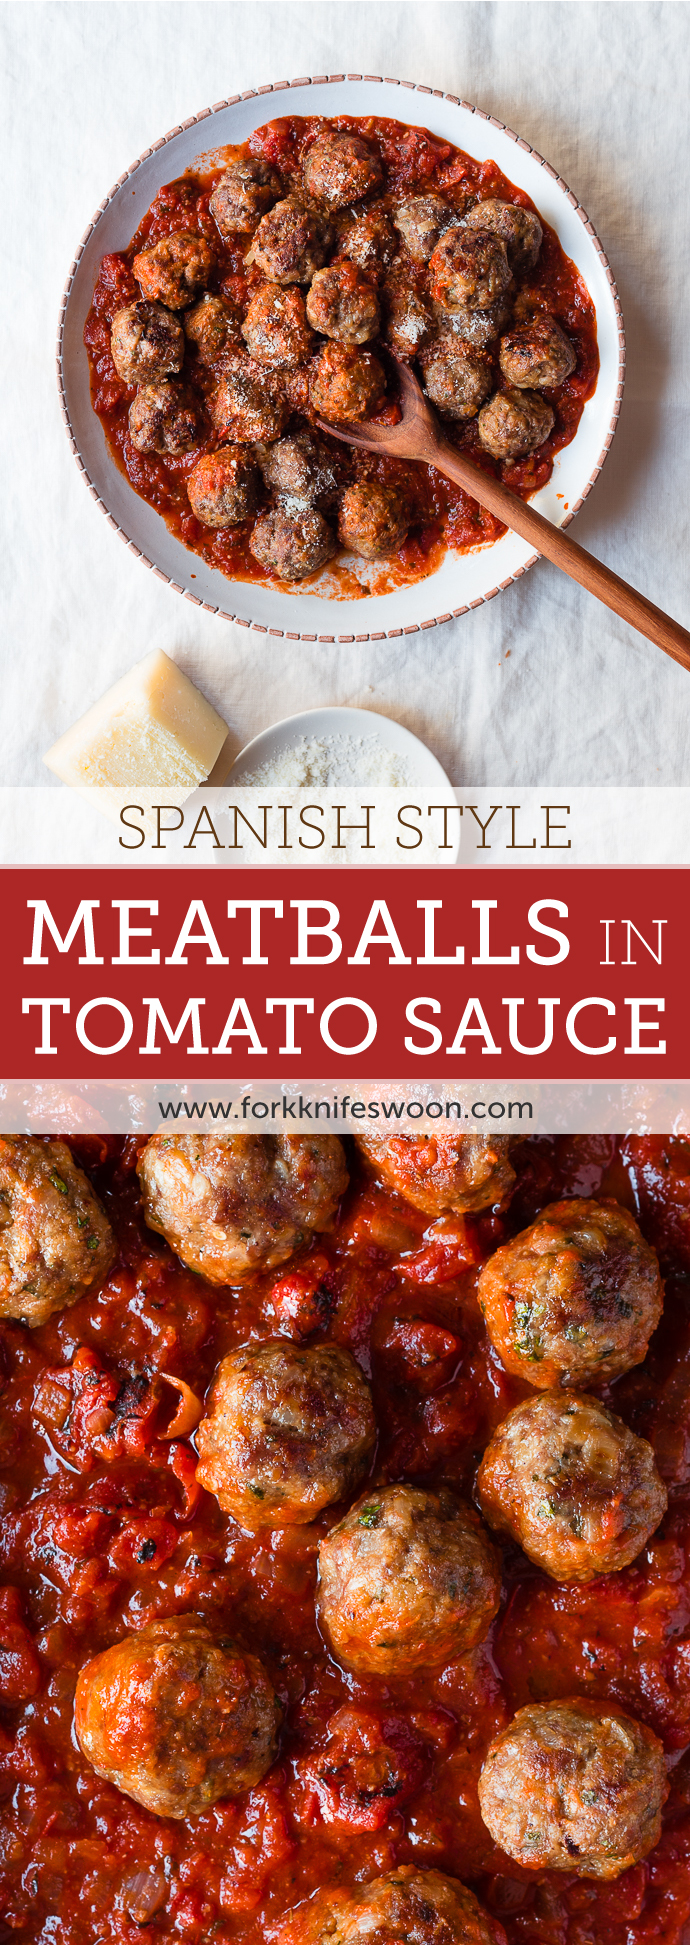 Spanish Style Meatballs in Spicy Tomato Sauce | Fork Knife Swoon @forkknifeswoon